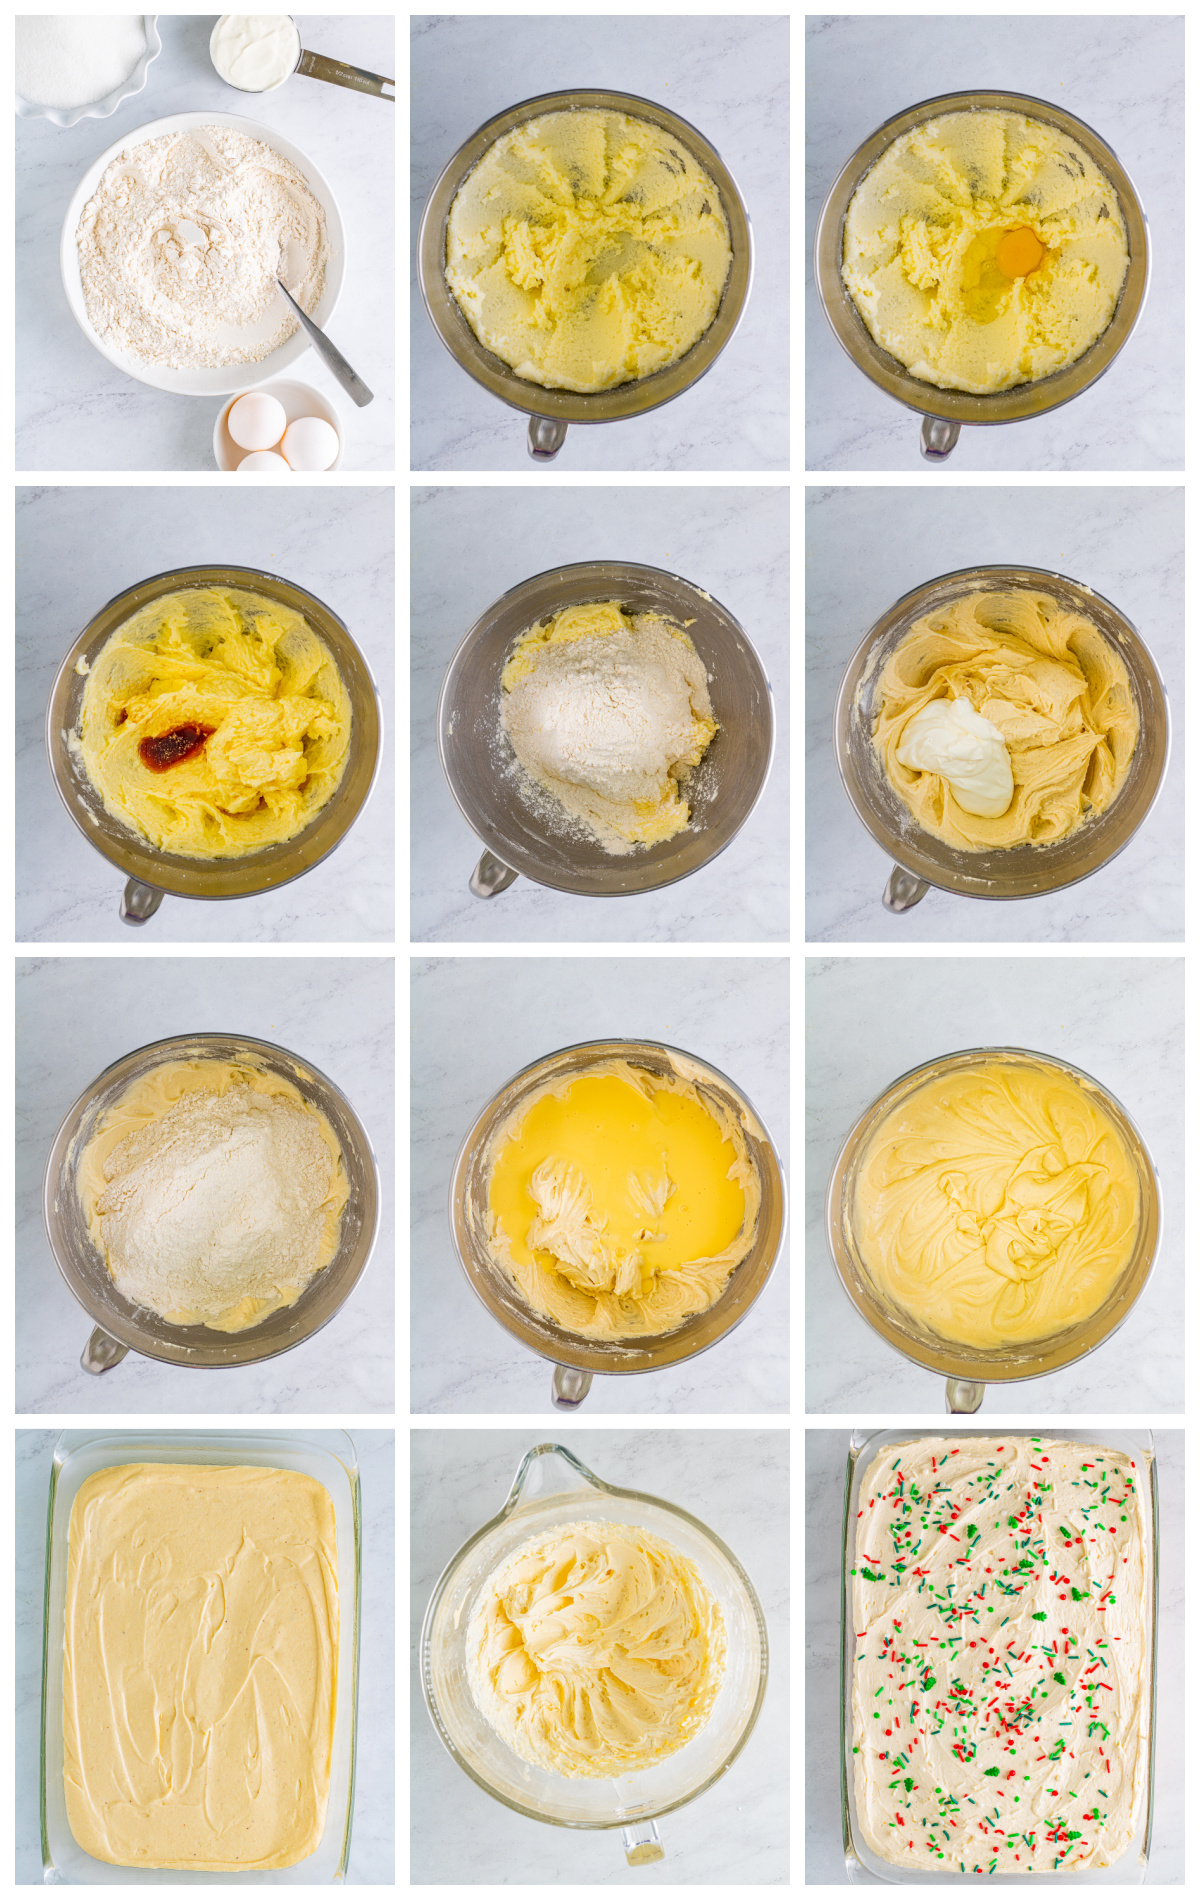 Step by step photos on how to make an Eggnog Cake.